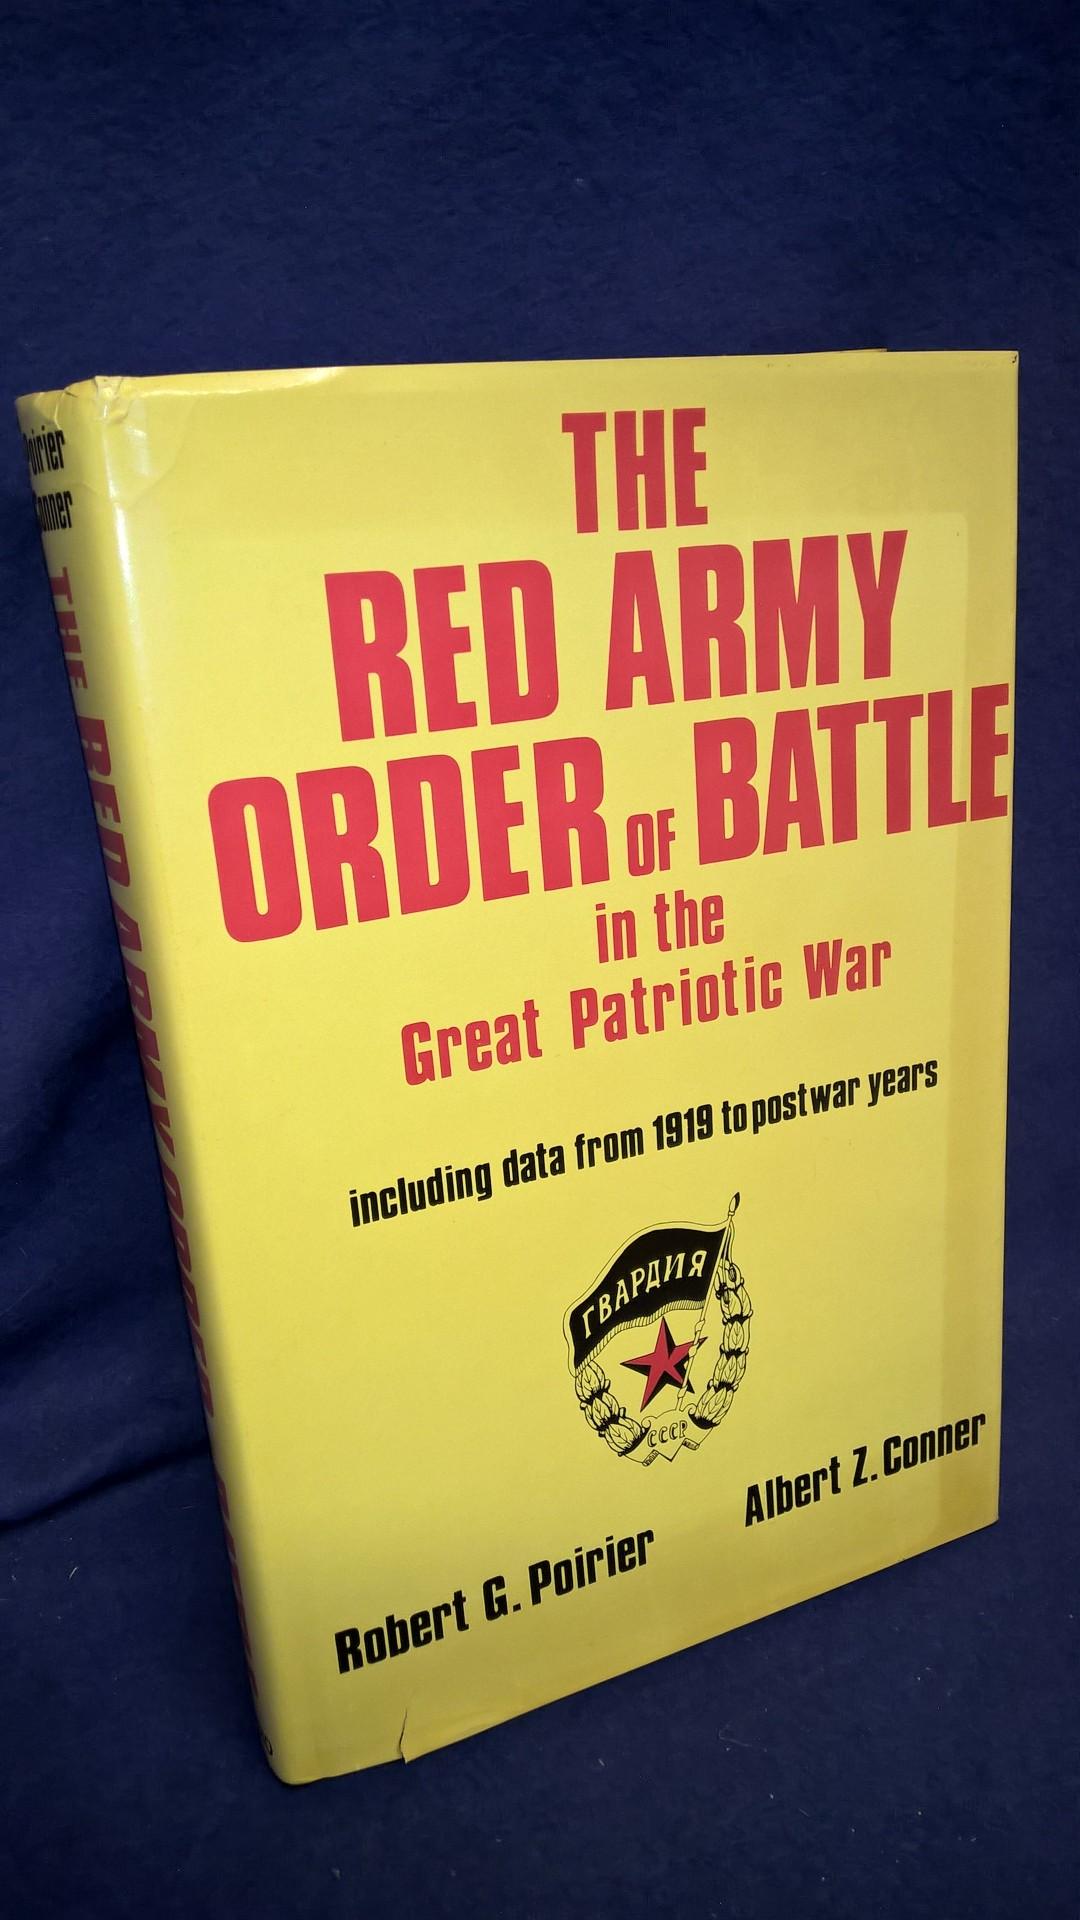 The Red Army Order of Battle in the Great Patriotic War including data from 1919 to post war years.